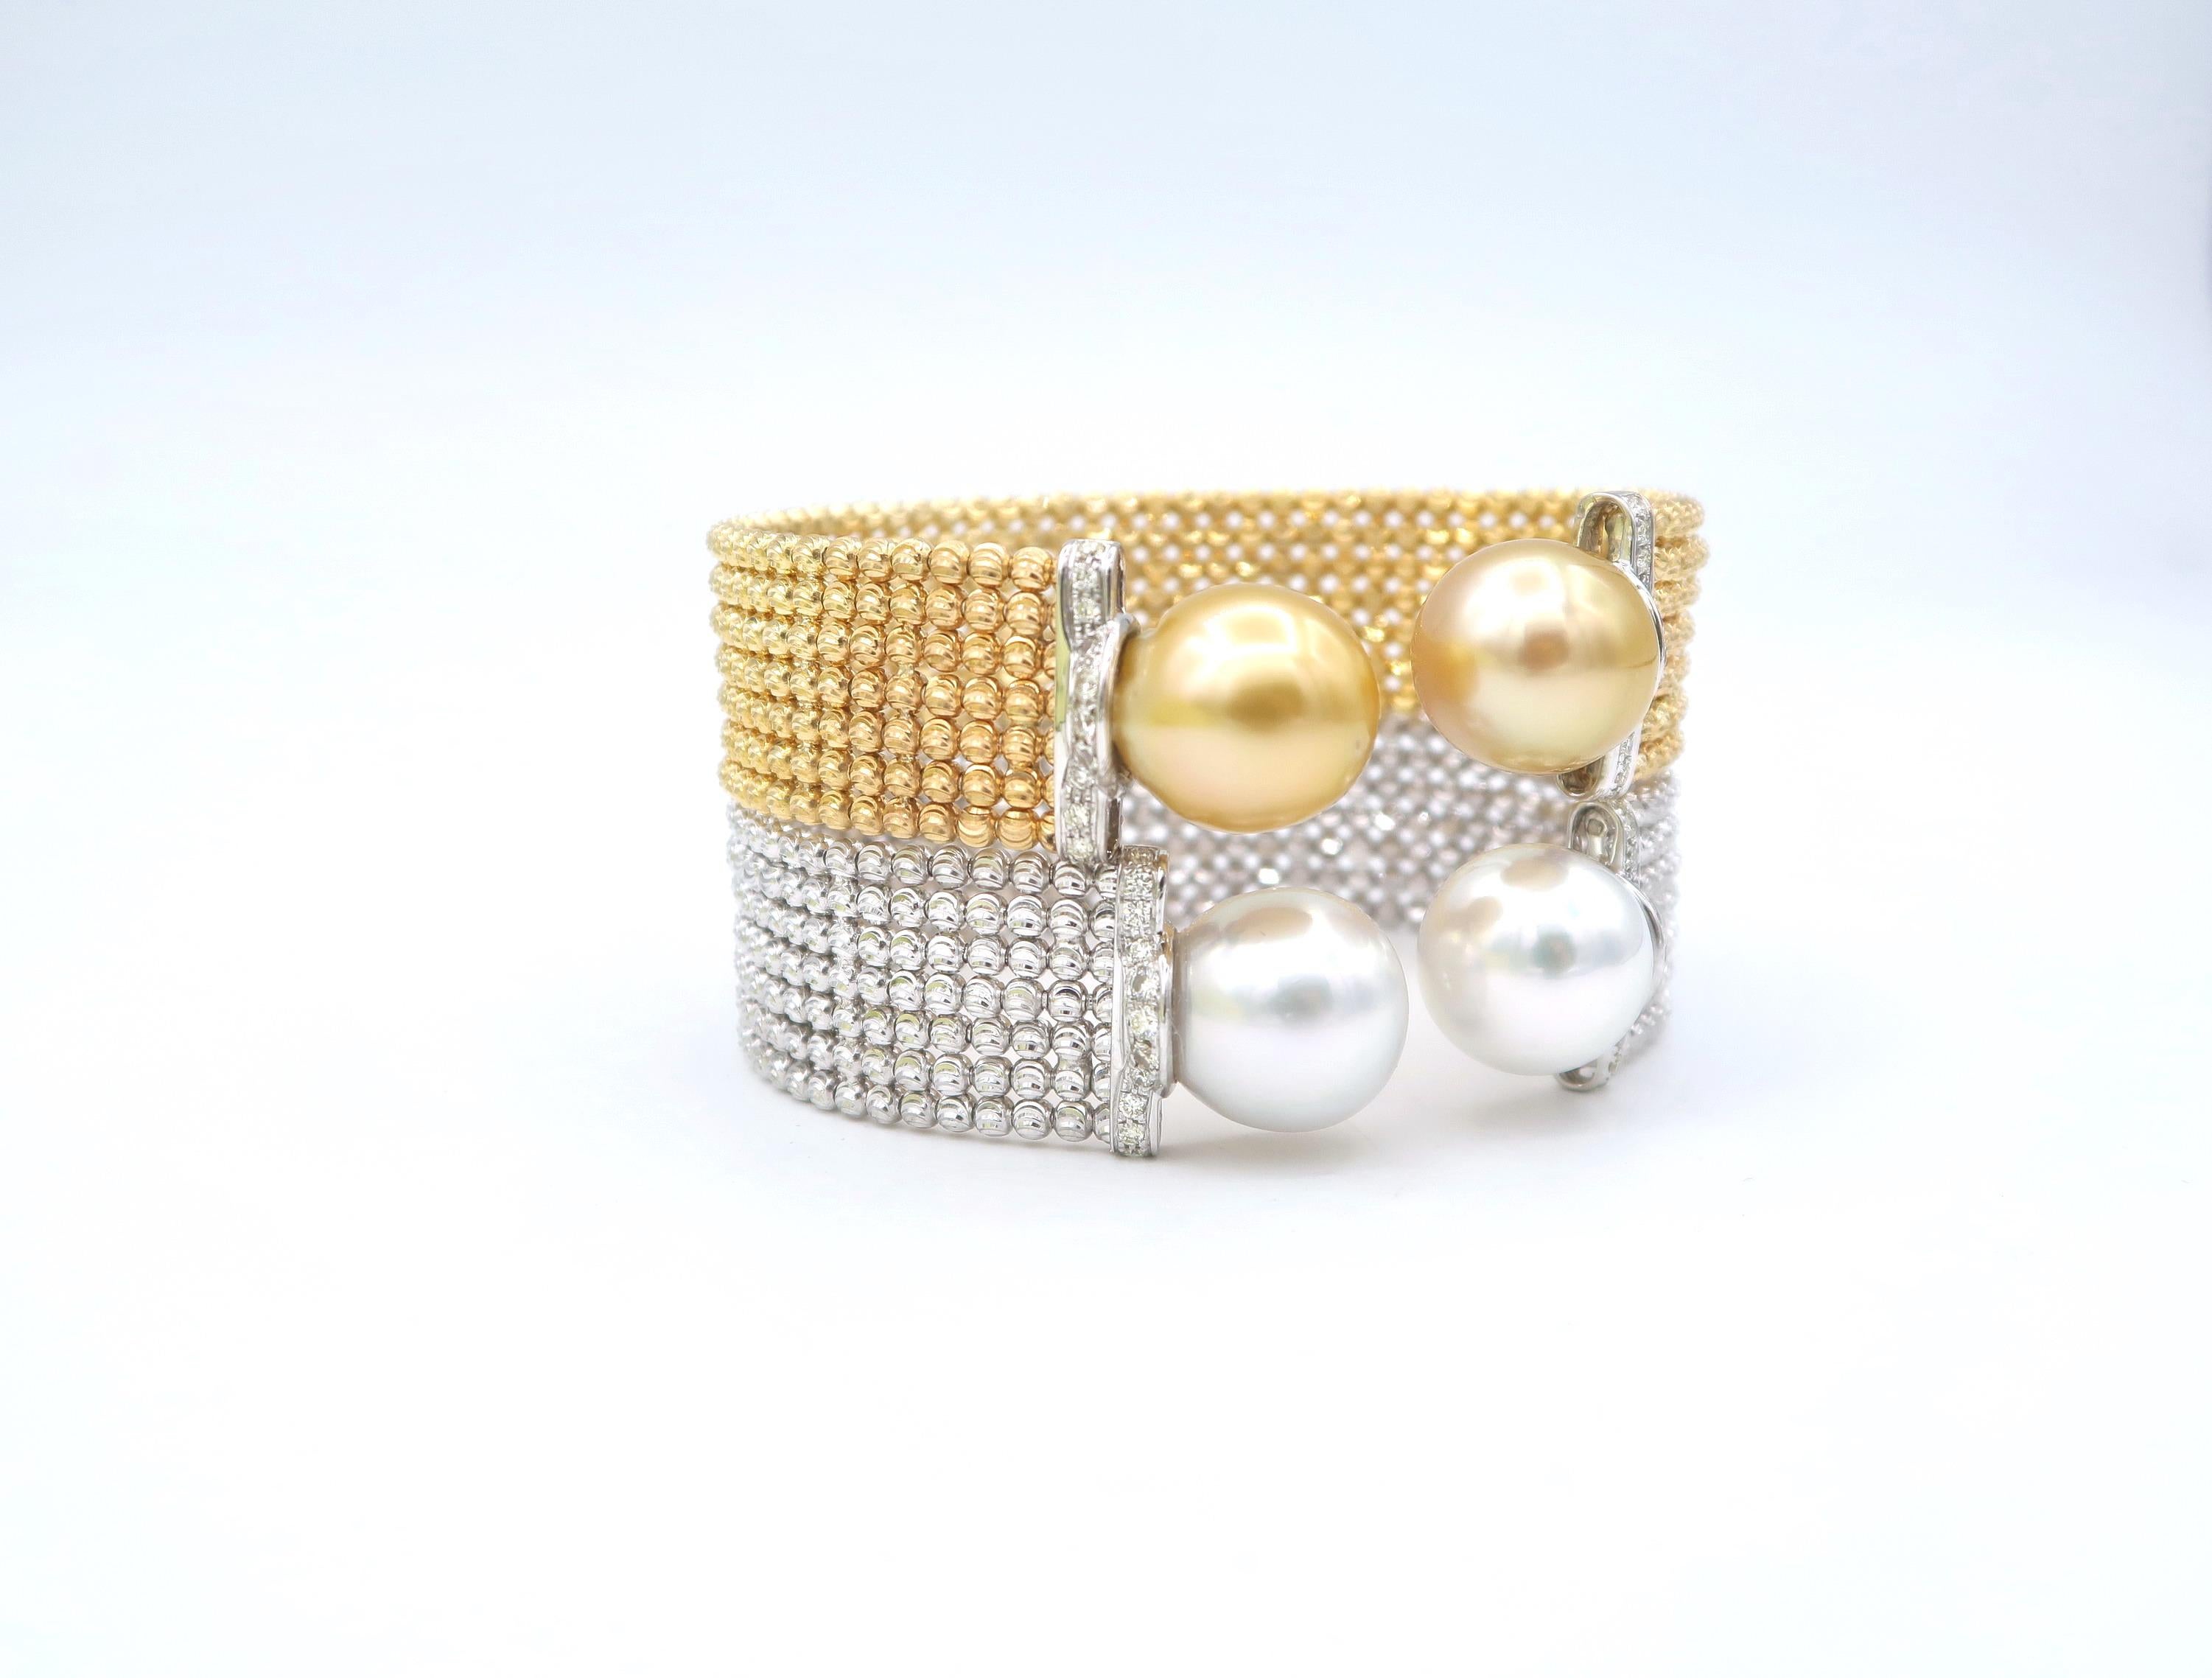 Easy-to-Wear Spring Open Bangle in 18K Gold w/ Diamonds & White South Sea Pearls For Sale 1